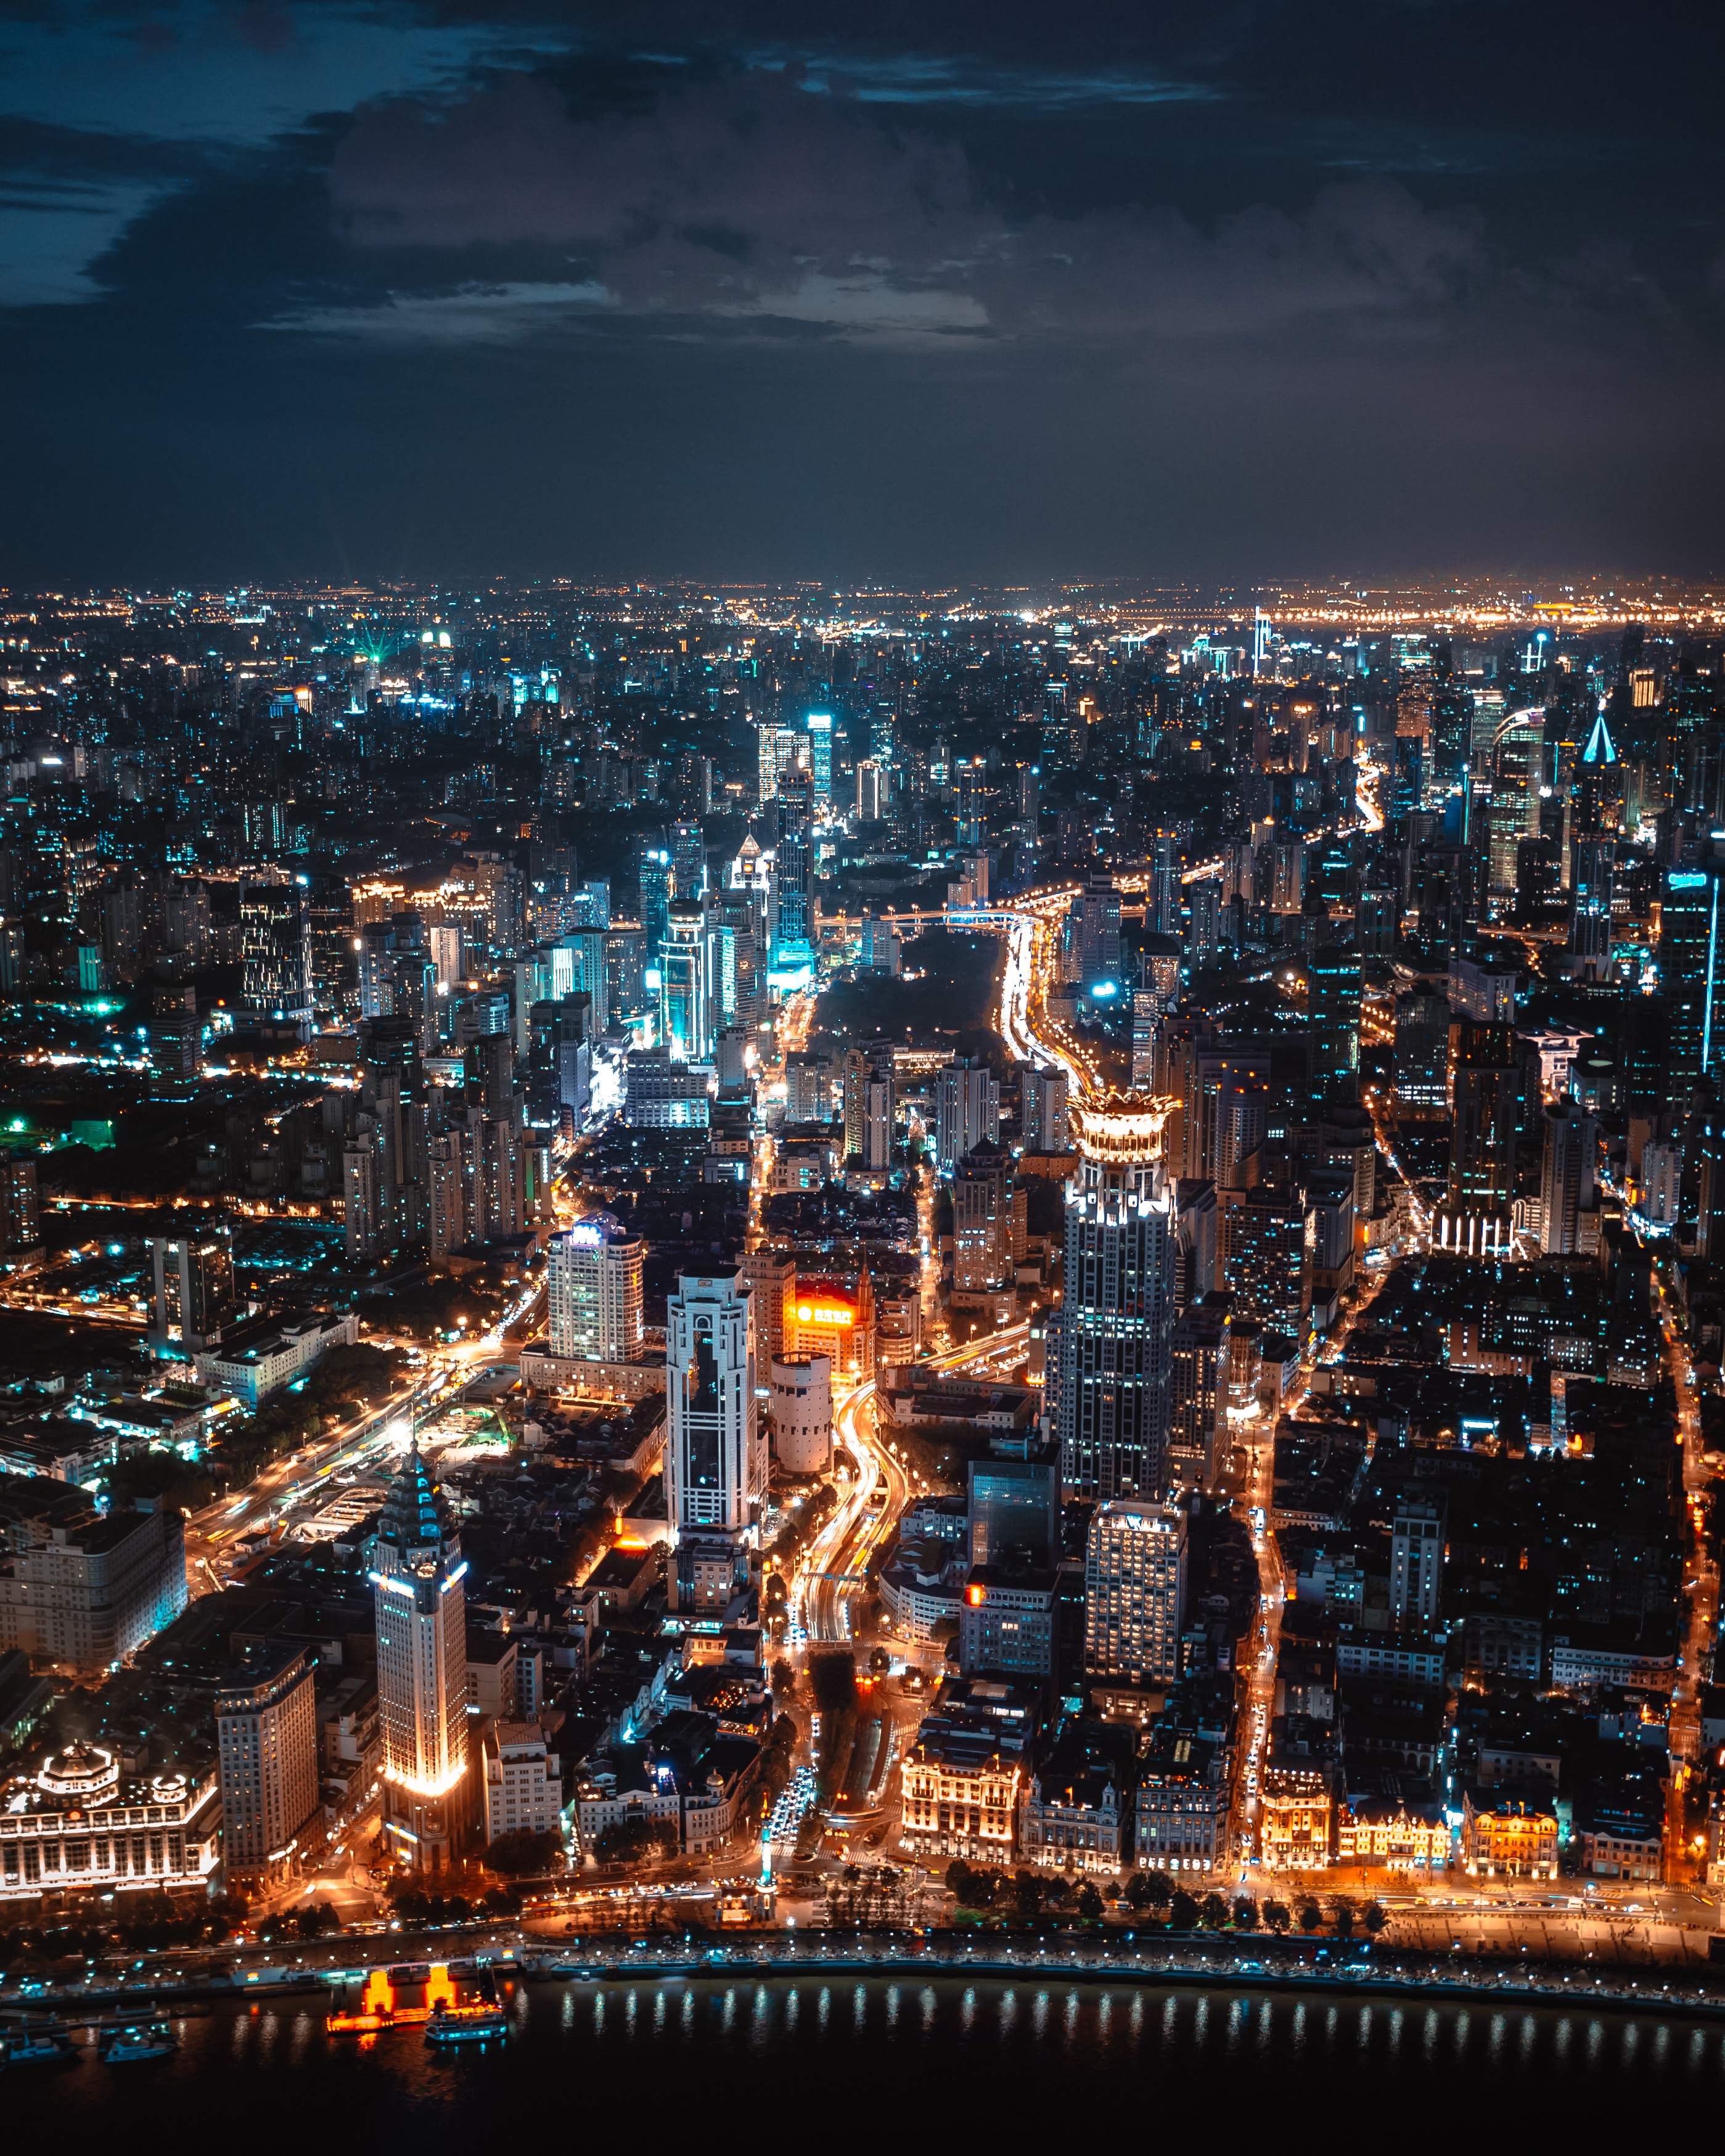 Download PC Wallpaper city lights, cities, view from above, night city, skyscrapers